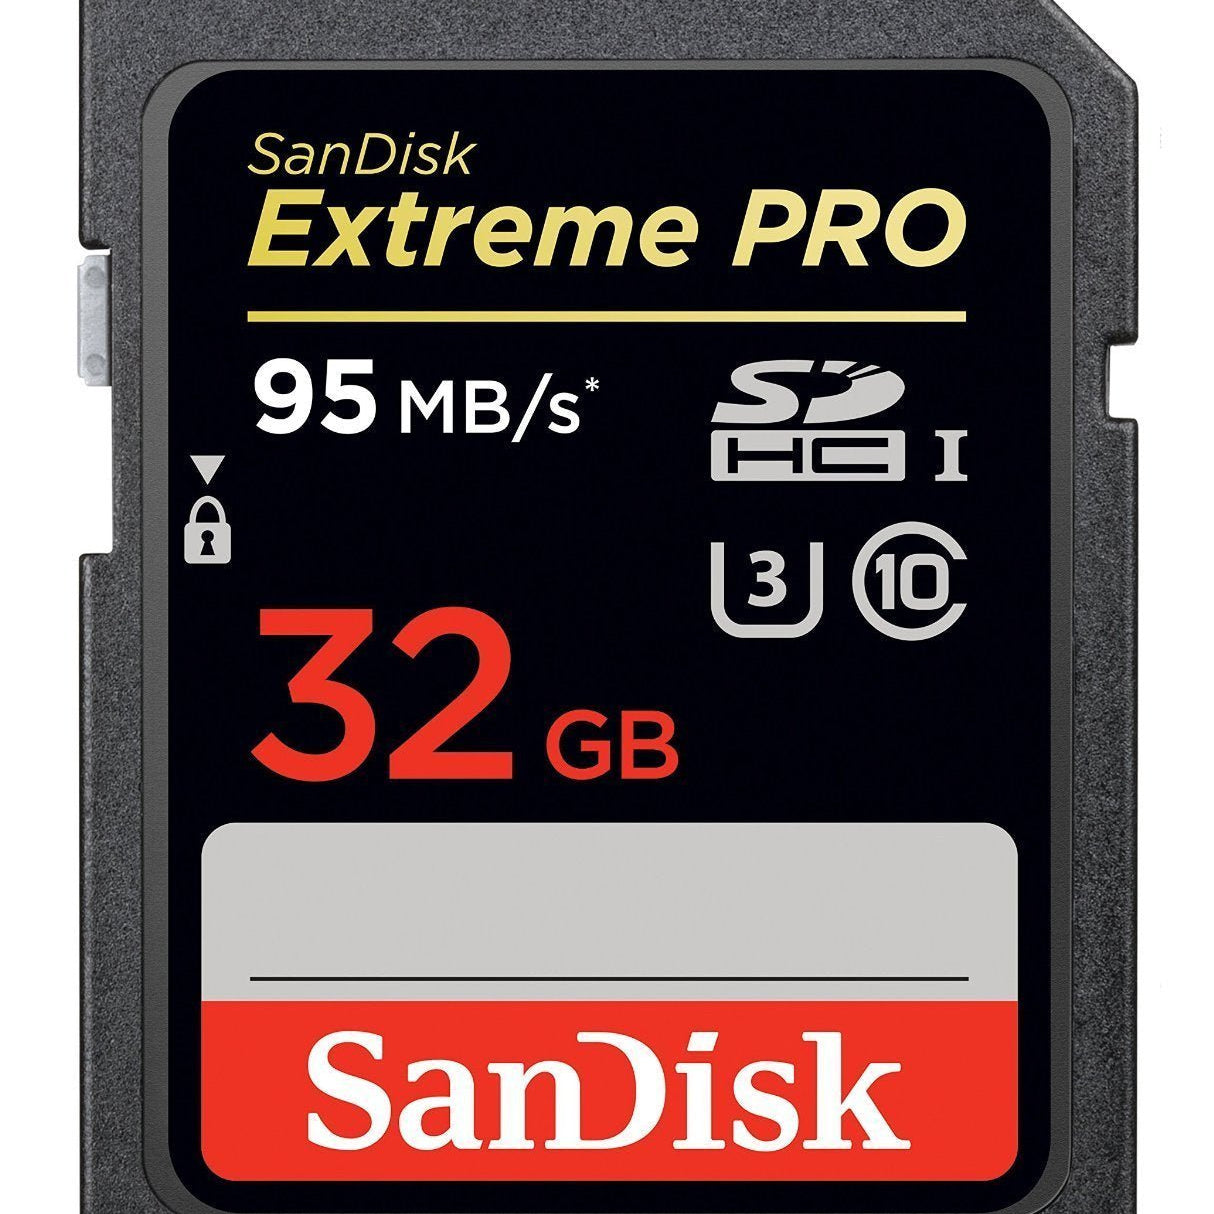 Sandisk Extreme Pro 32Gb Class 10 SDHC UHS-1 flash Memory Card 95mb/s - The Camerashop